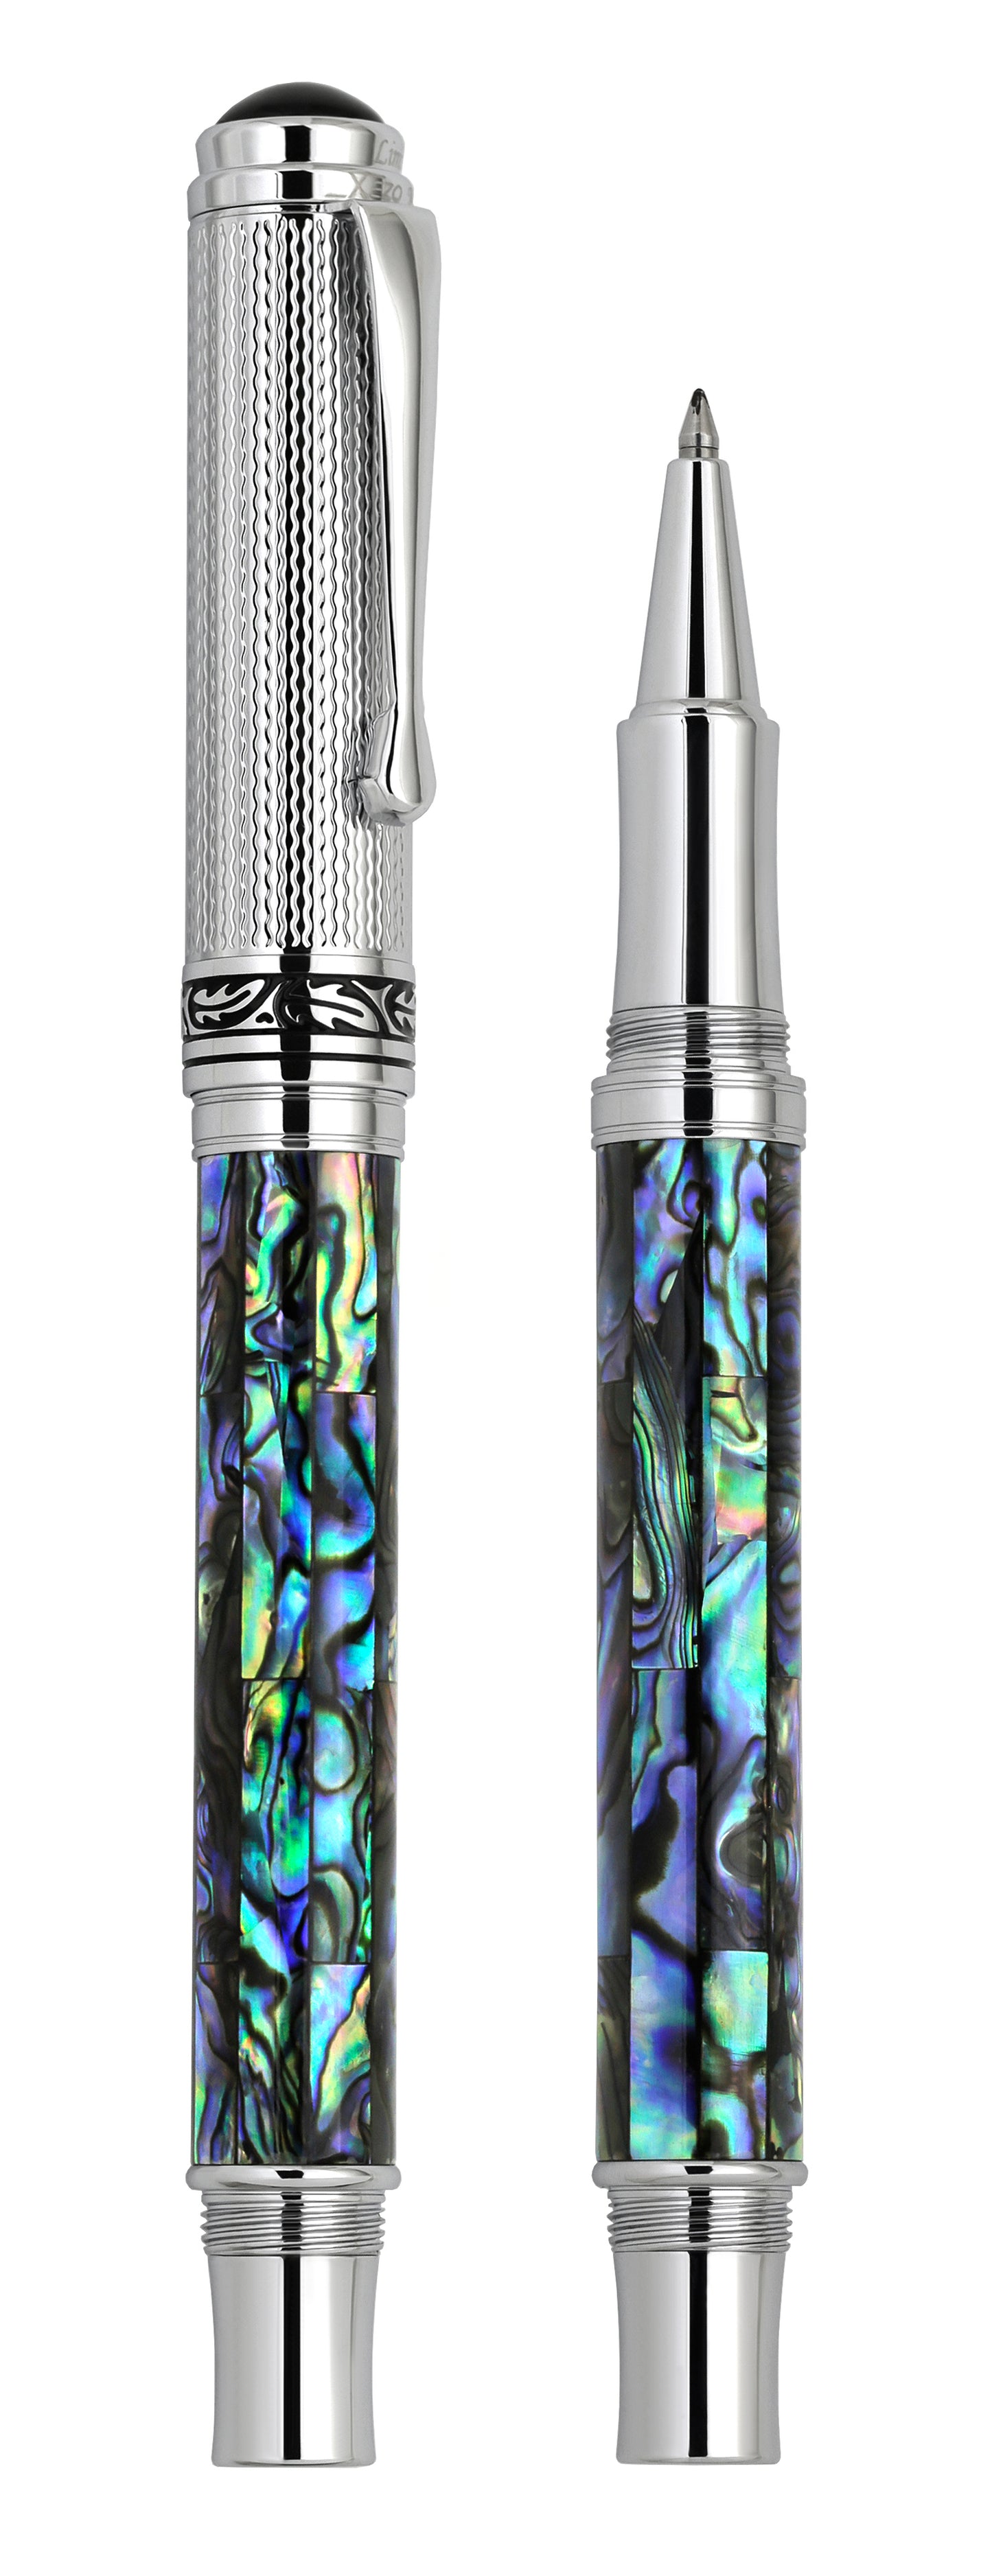 Xezo - Vertical view of two Maestro Paua Abalone Chrome R rollerball pens. The pen on the left is capped, and the pen on the right has no cap